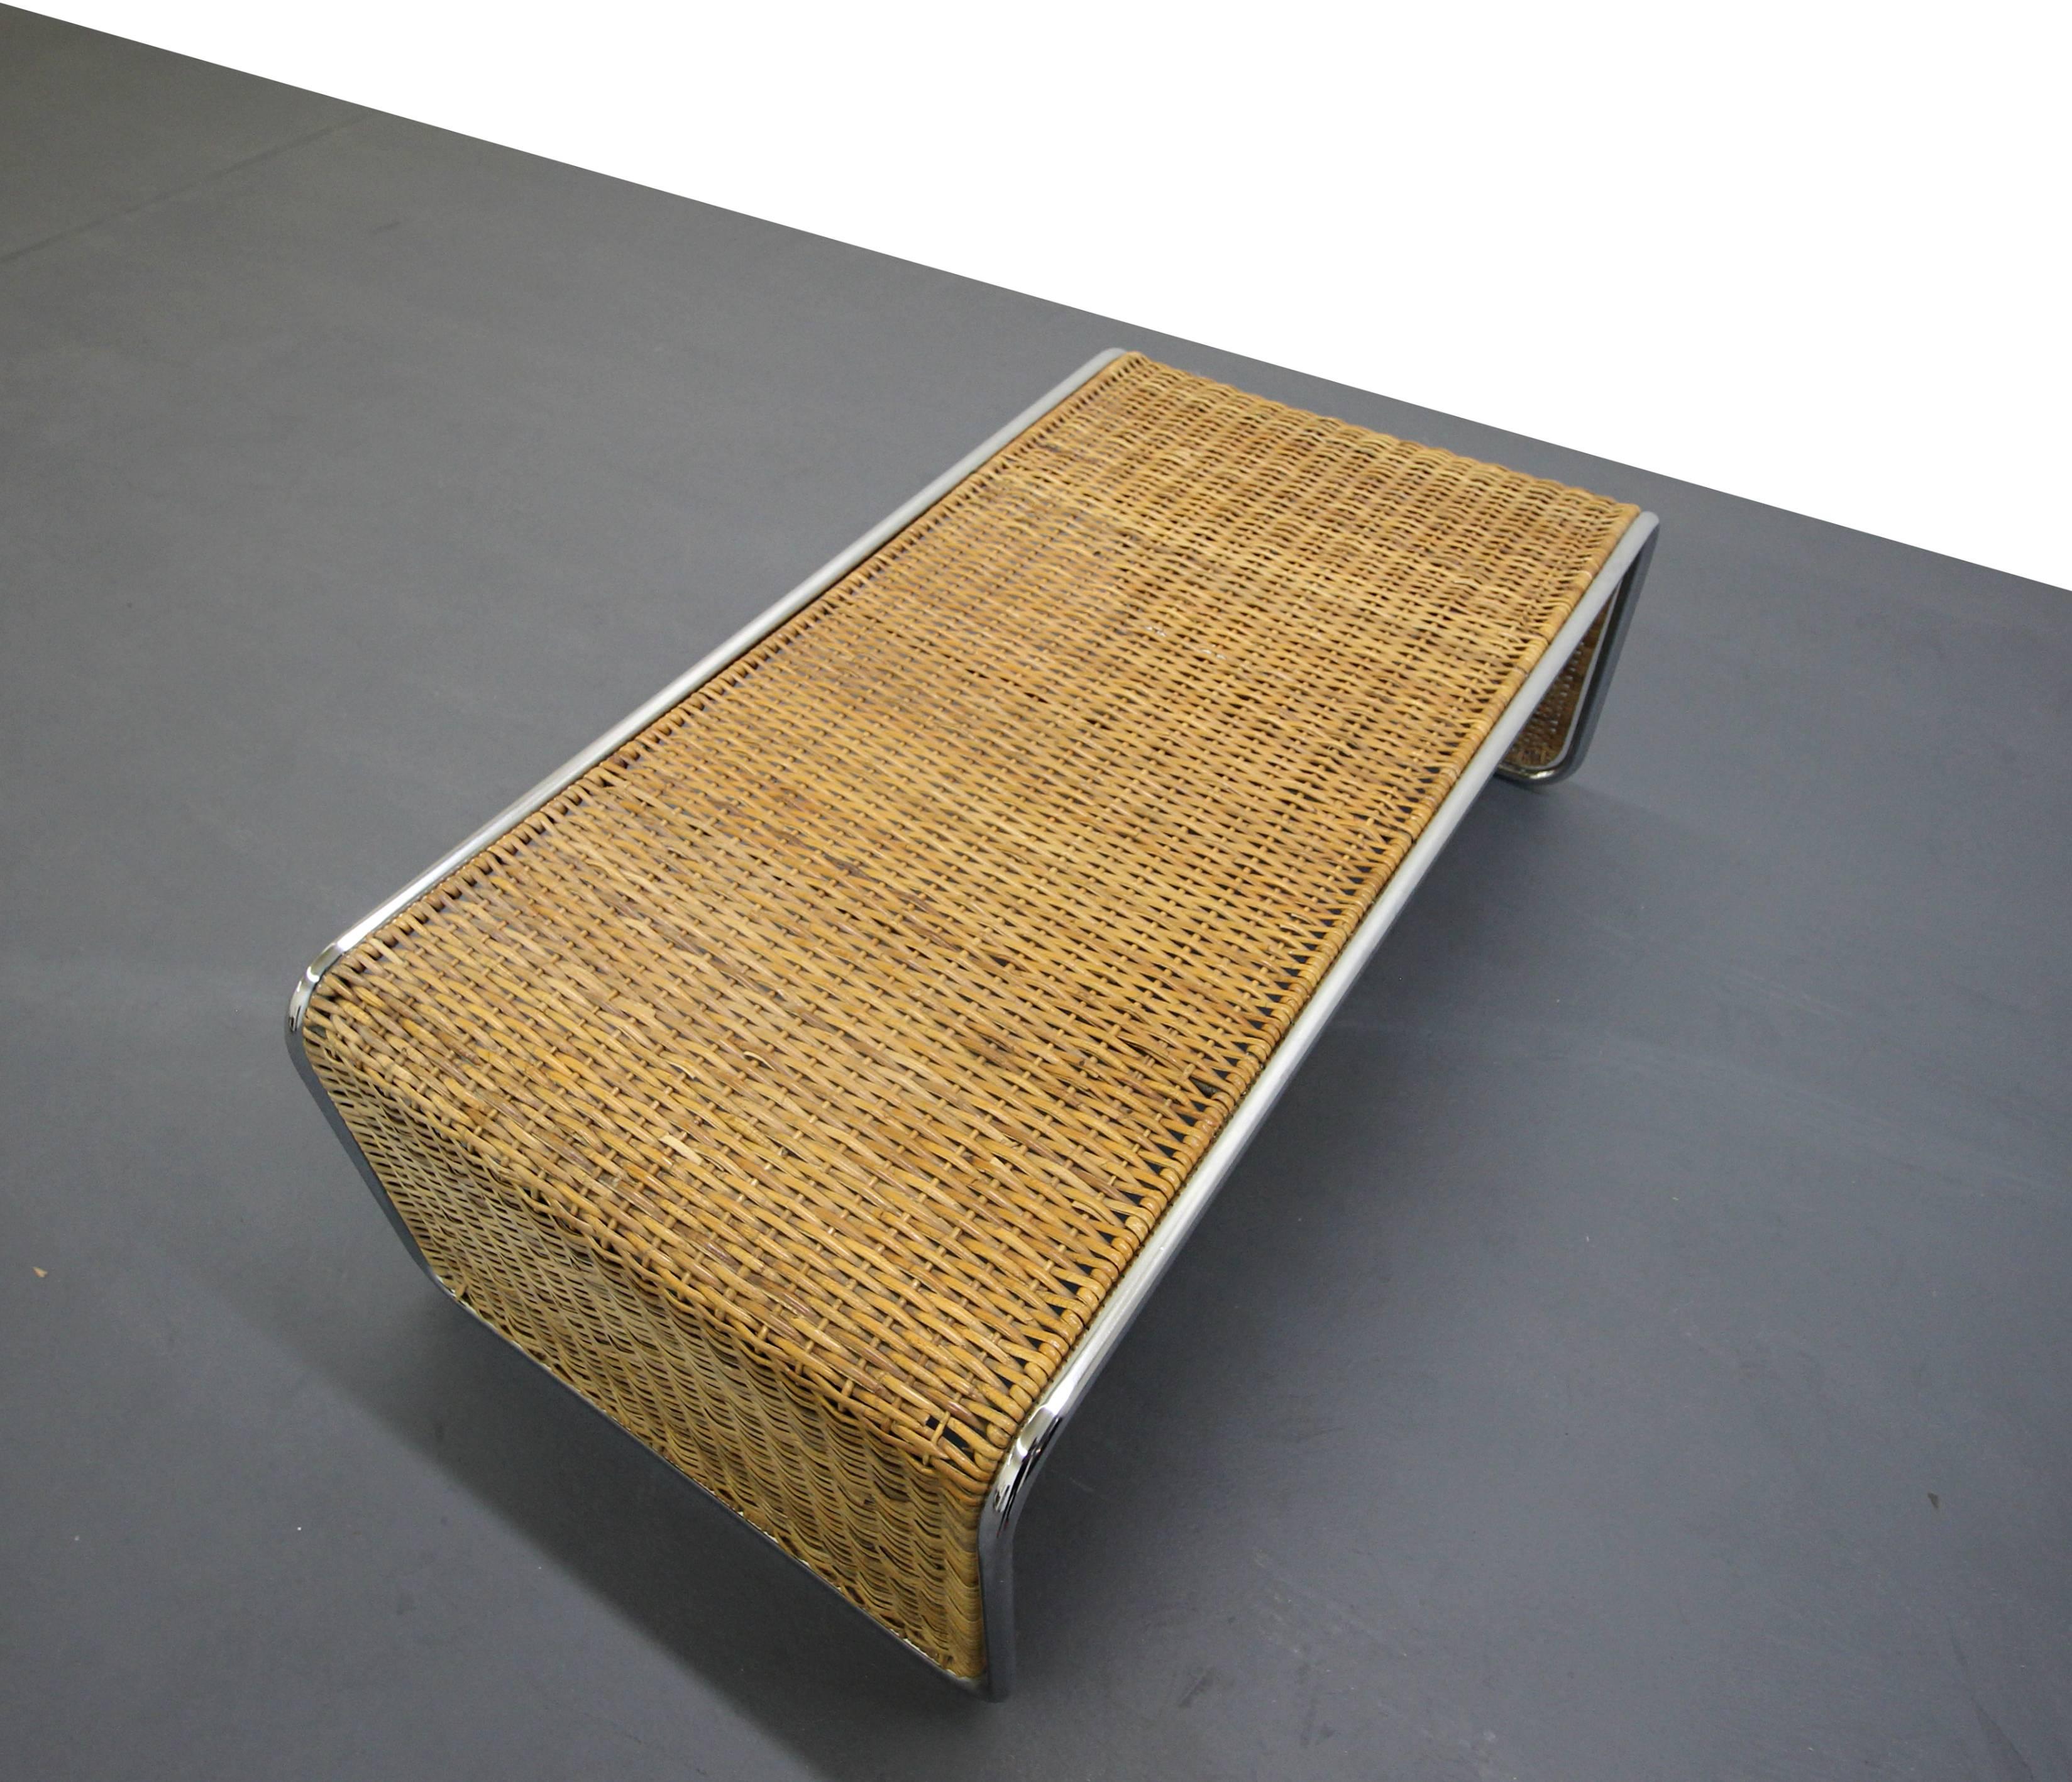 Unique Mid-Century woven bamboo and tubular chrome waterfall coffee table. This table has a very eclectic, Bohemian, bungalow feel to it. Can't find another like it. Looking to add a bit of a textured, natural element to your space, this guy is